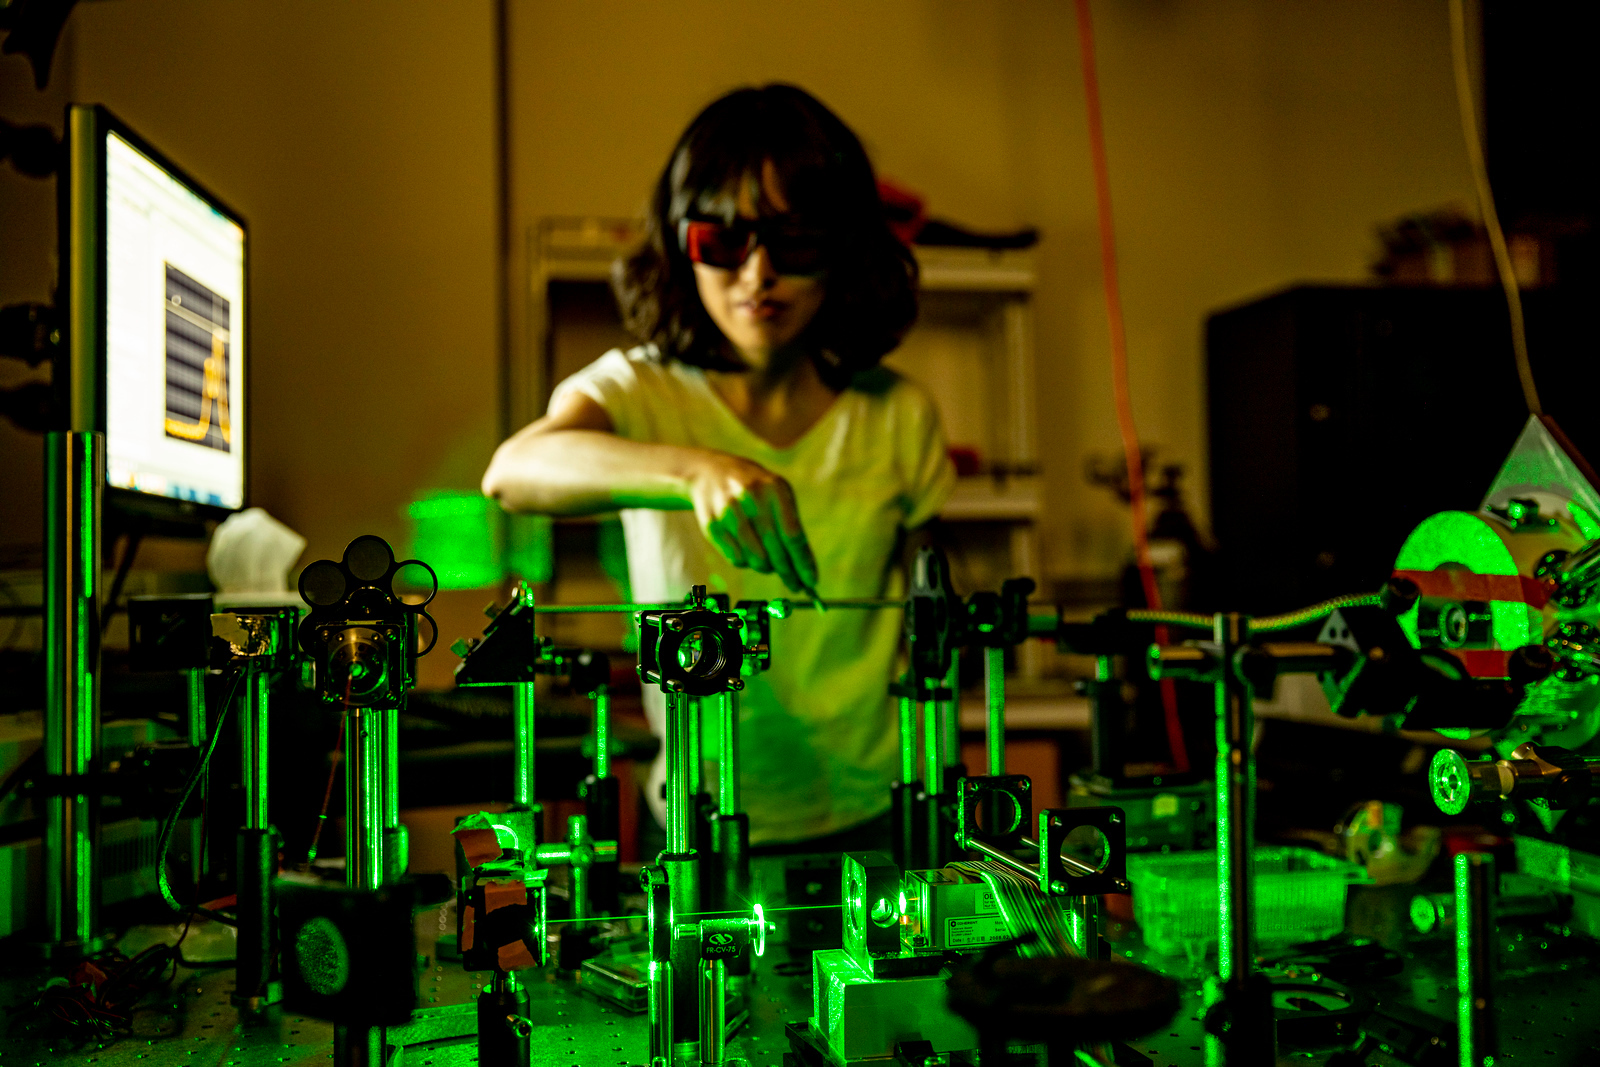 A woman in dark glasses works with an array of lab equipment lit in bright green